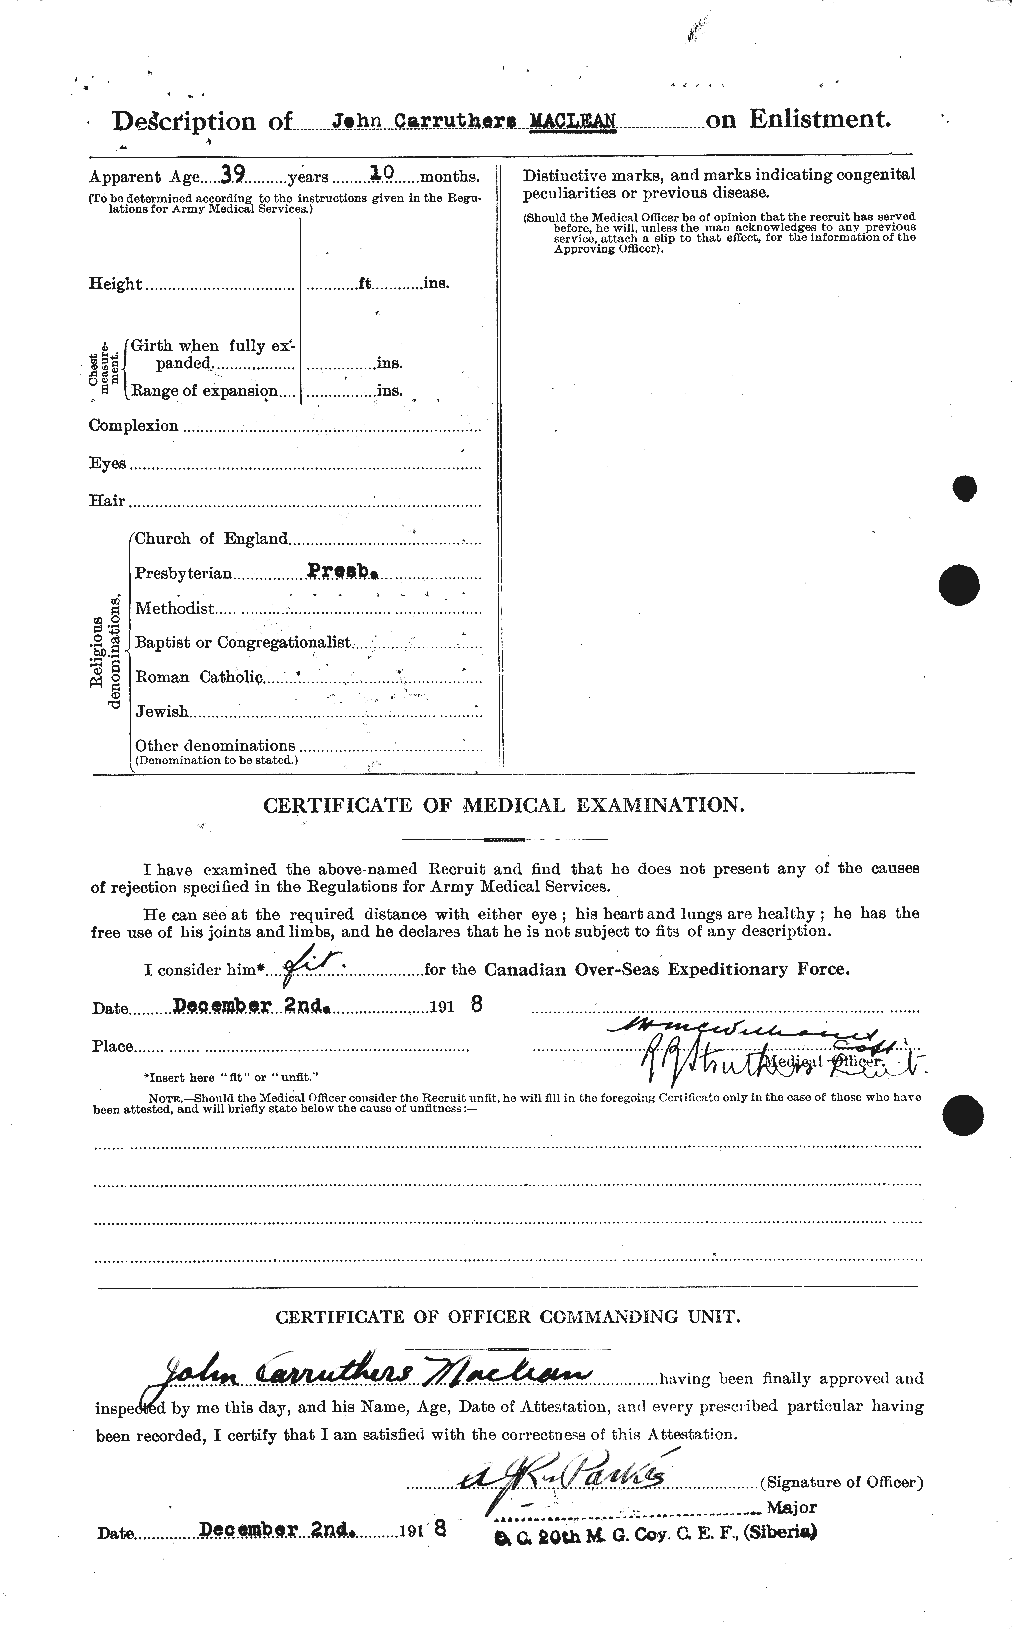 Personnel Records of the First World War - CEF 531802b